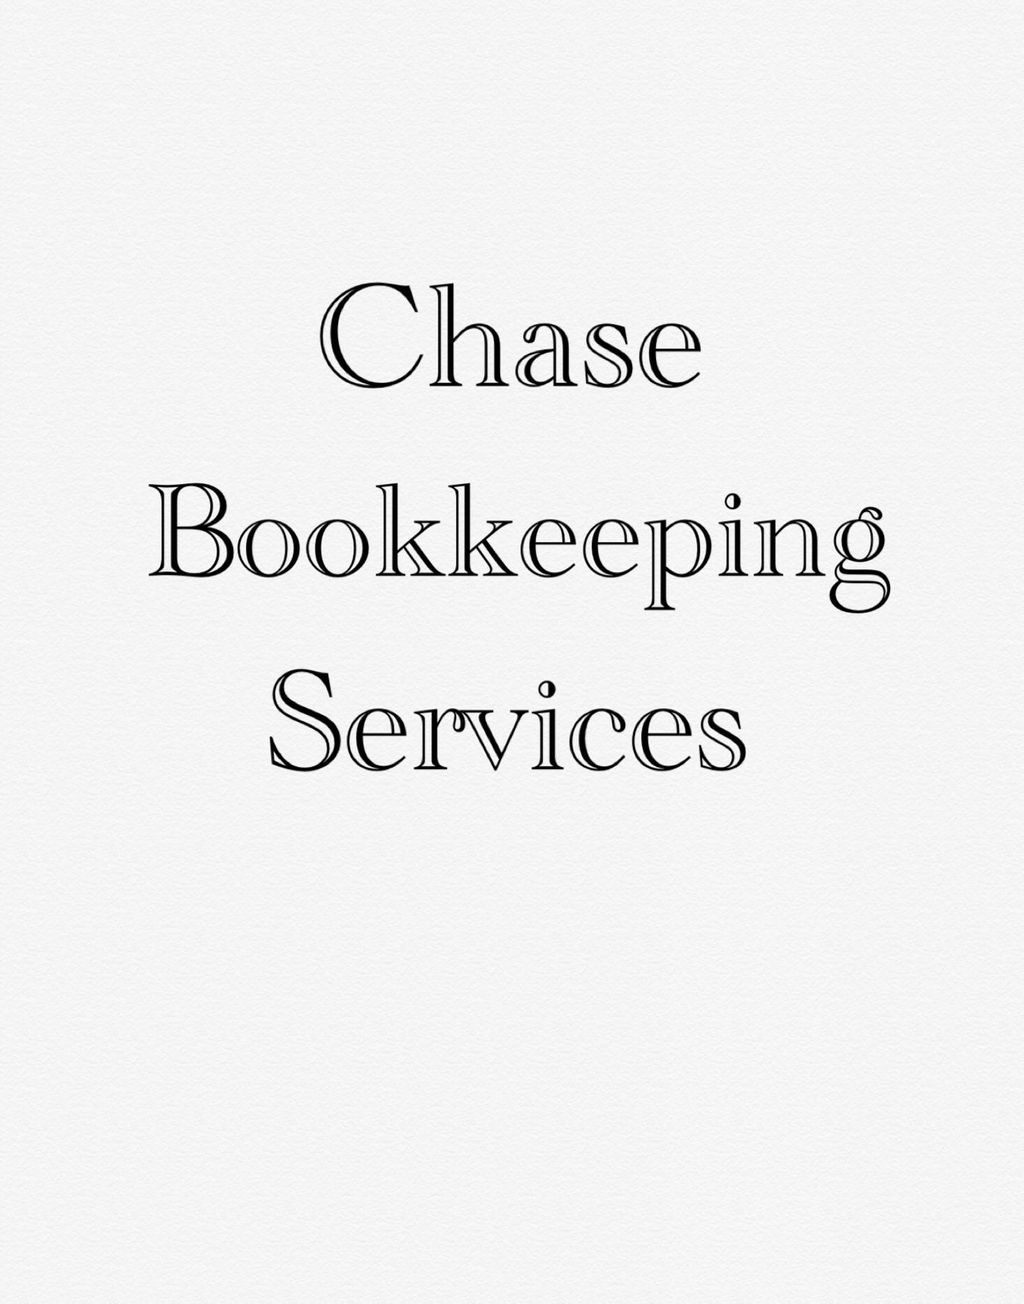 Chase Bookkeeping Services